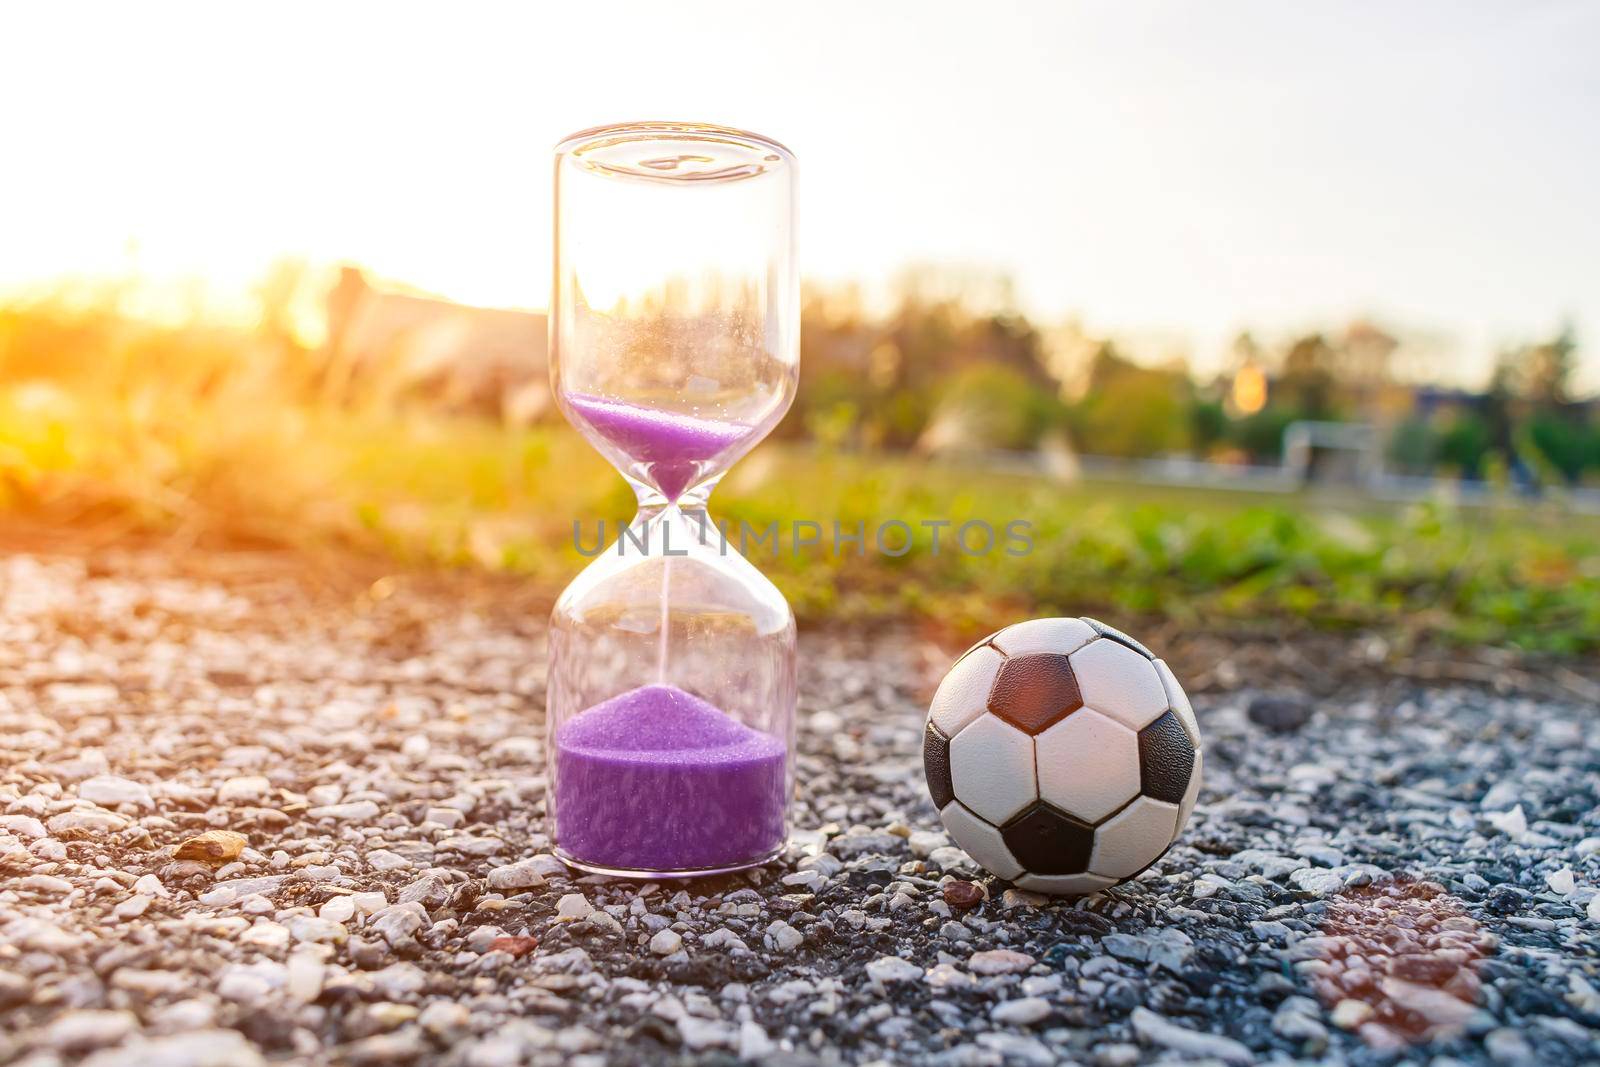 Soccer ball and hourglass symbolizing football time. The concept of sports for everyone and everywhere